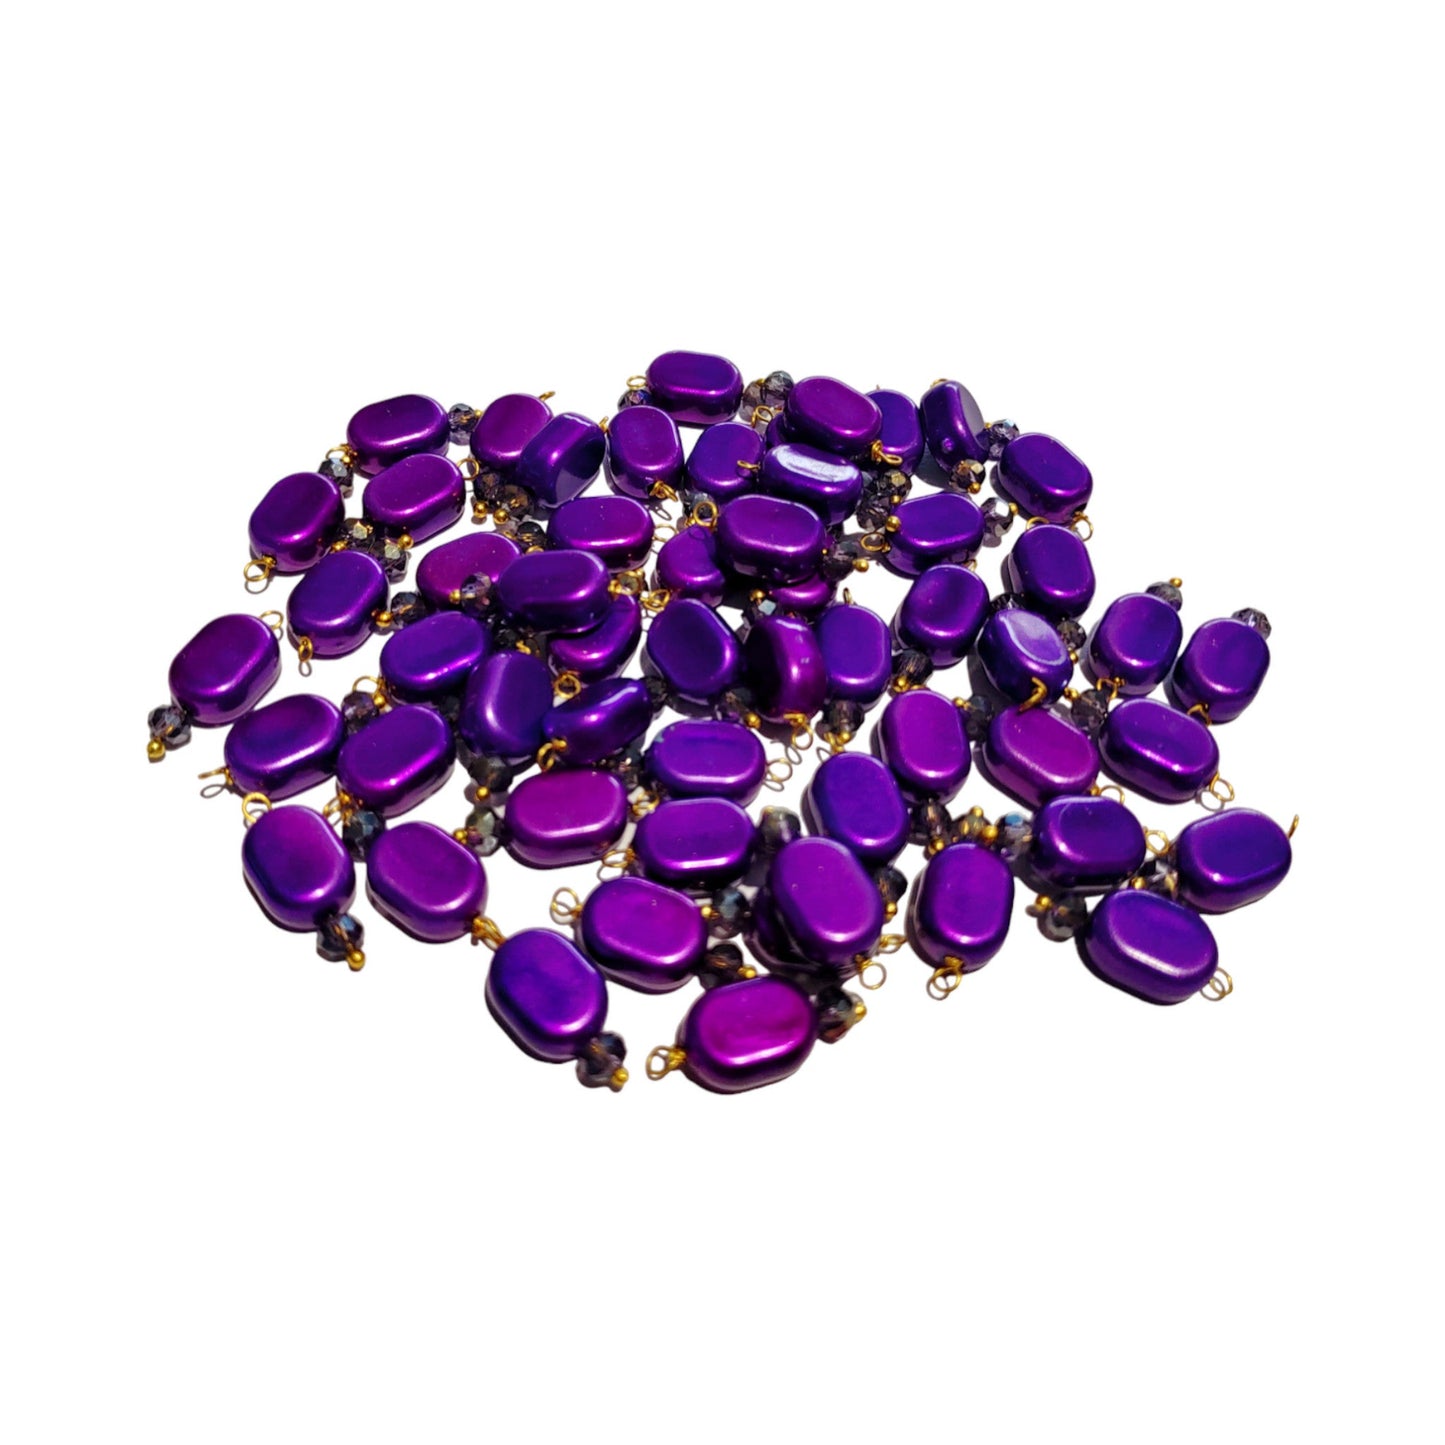 Indian Petals 100Pcs Colored Plastic Bead with Crystal Ball Drop for Craft Décor or Jewelry Making, 8x12mm, Indigo